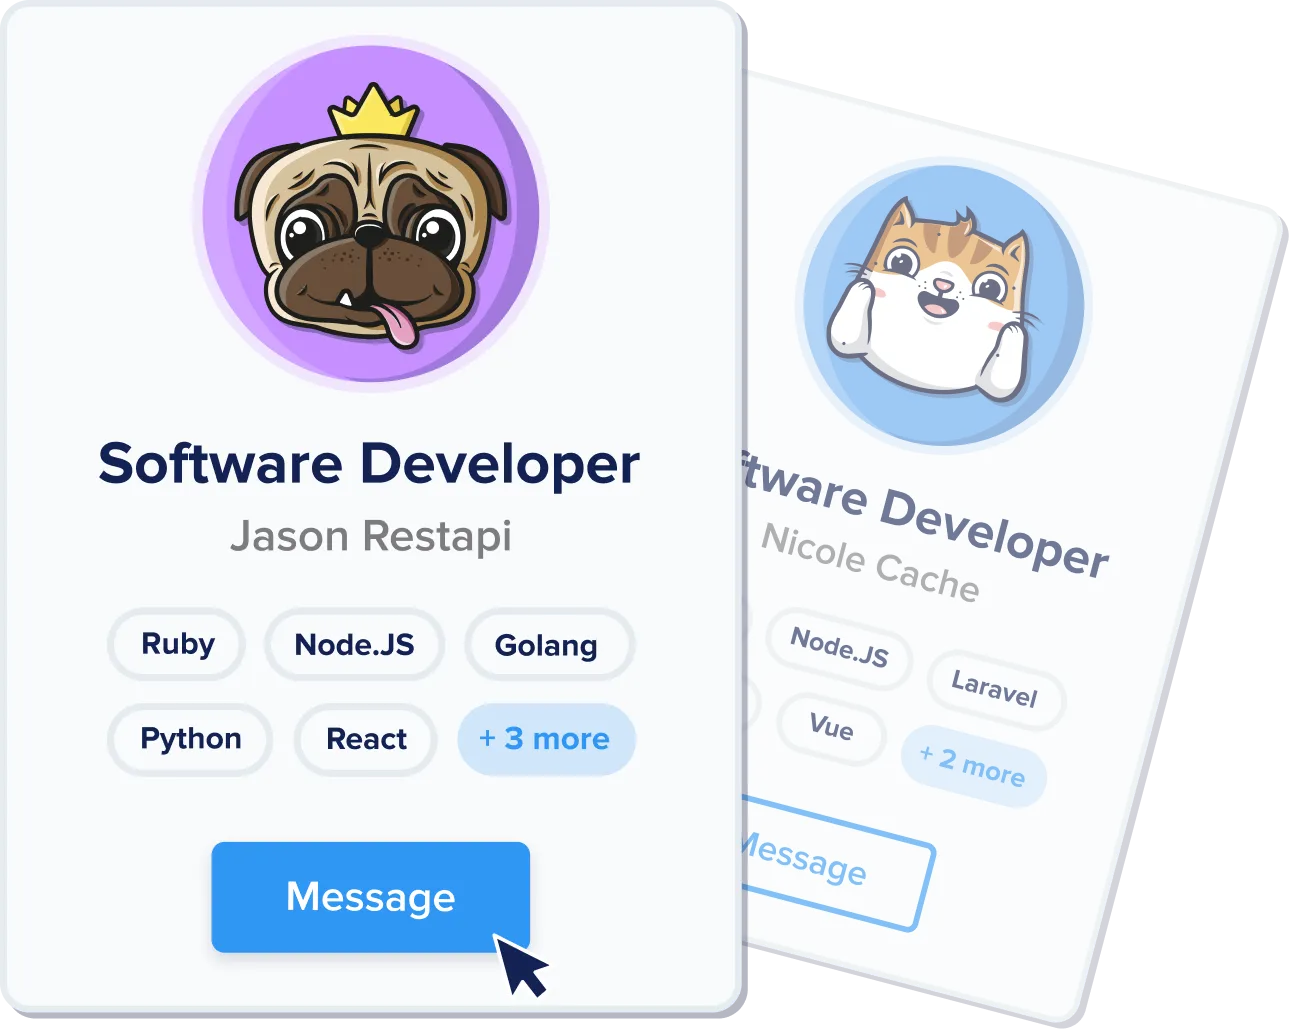 software developer card illustration with a click on the "message" button